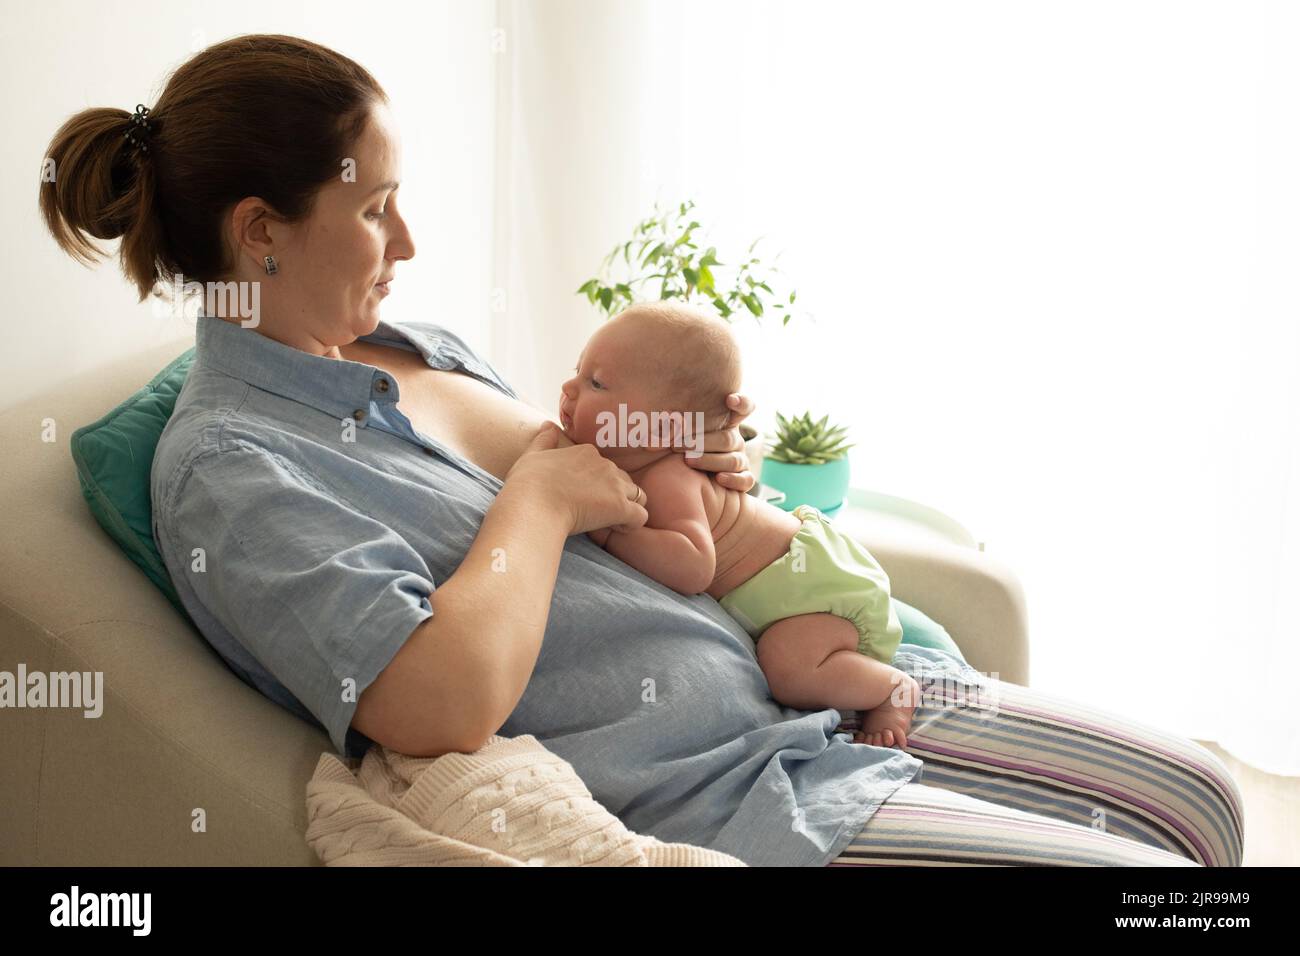 Breastfeeding in laid back position. Mothed and baby at the chair. Stock Photo